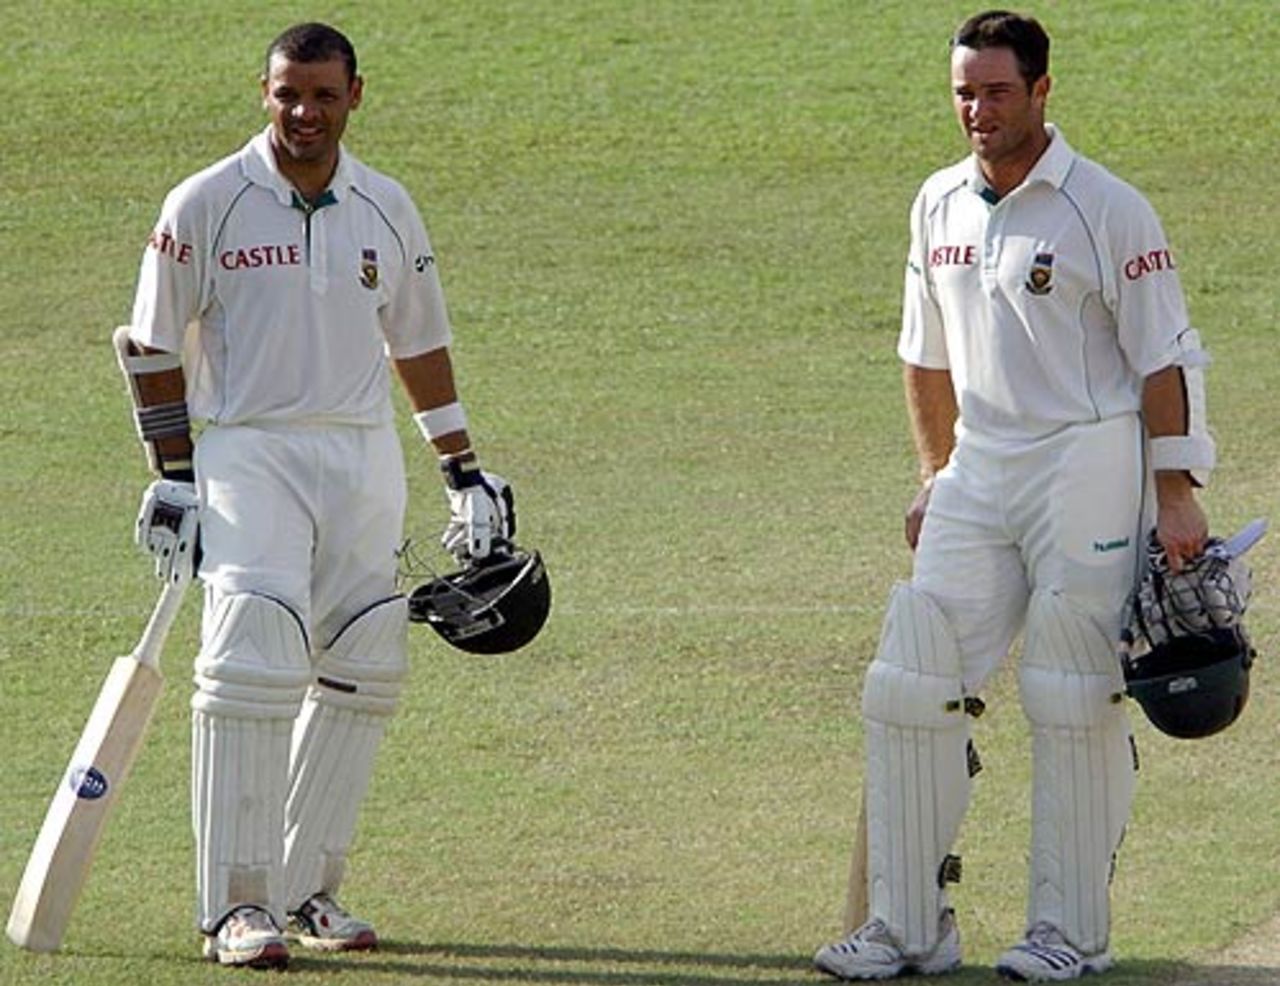 Ashwell Prince and Mark Boucher during their partnership, Sri Lanka v South Africa, 1st Test, Colombo (SSC), 4th day, July 30 2006